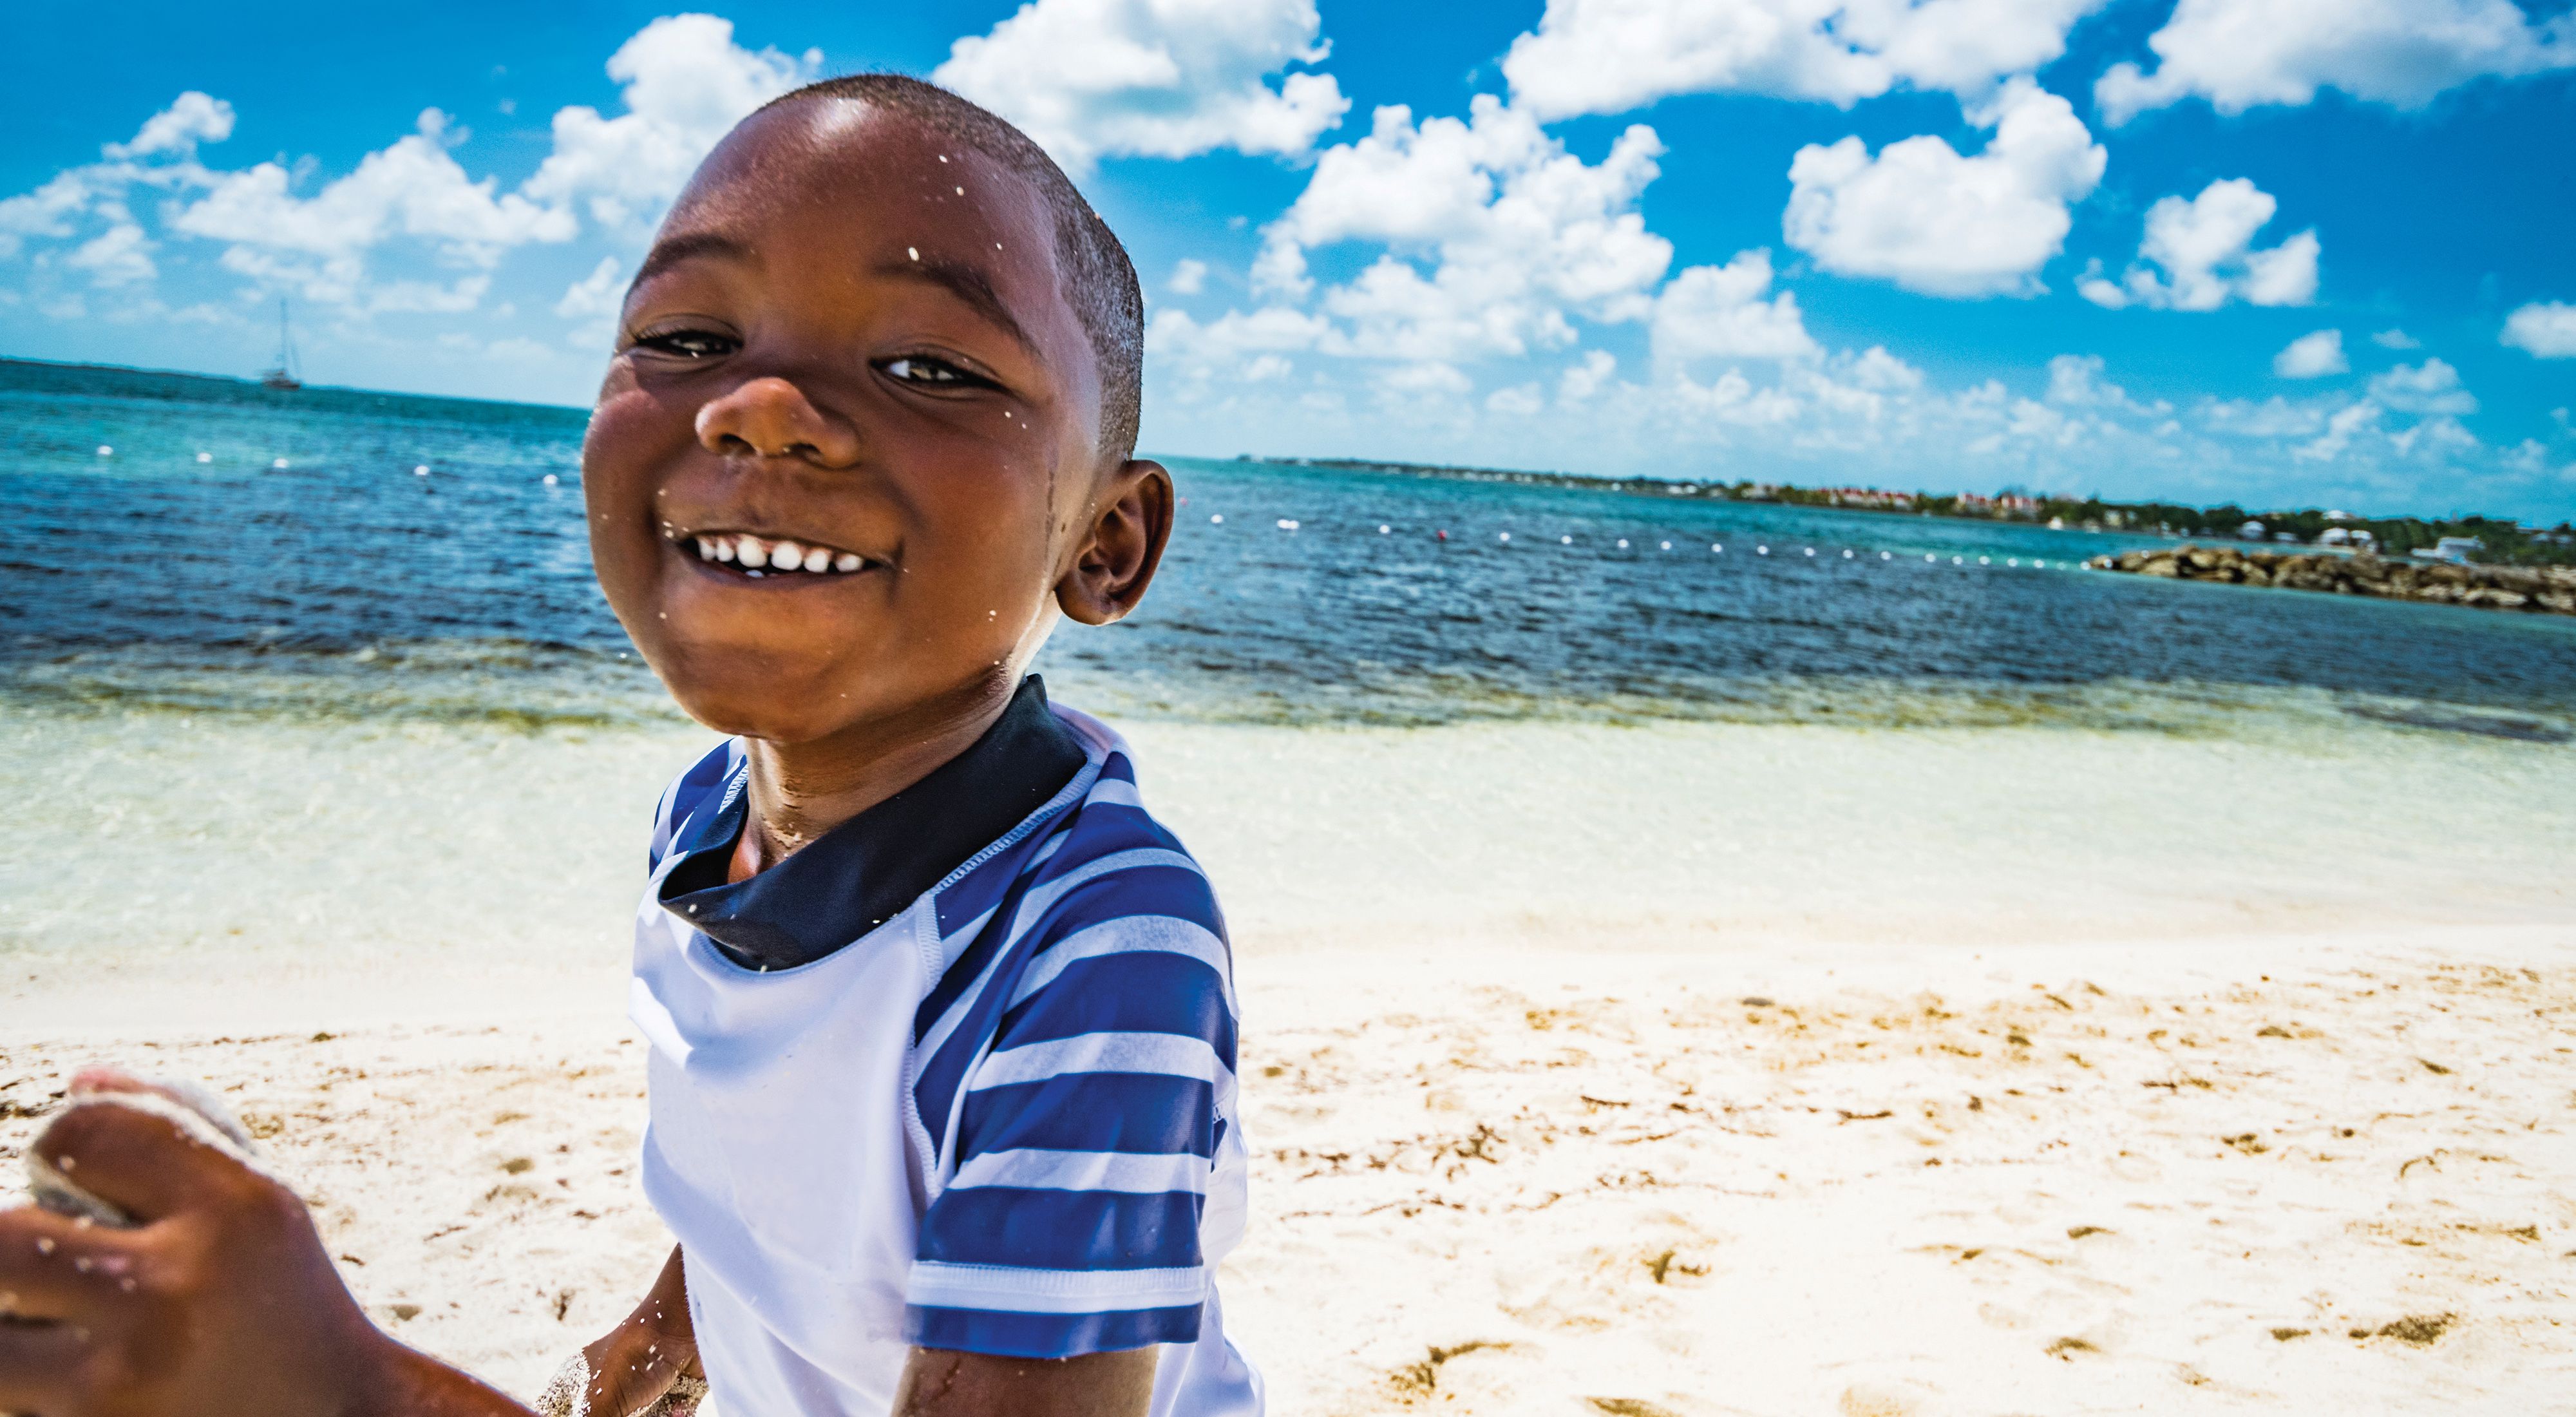 A young boy smiles as he runs along a sandy beach, with blue water and sky behind him.